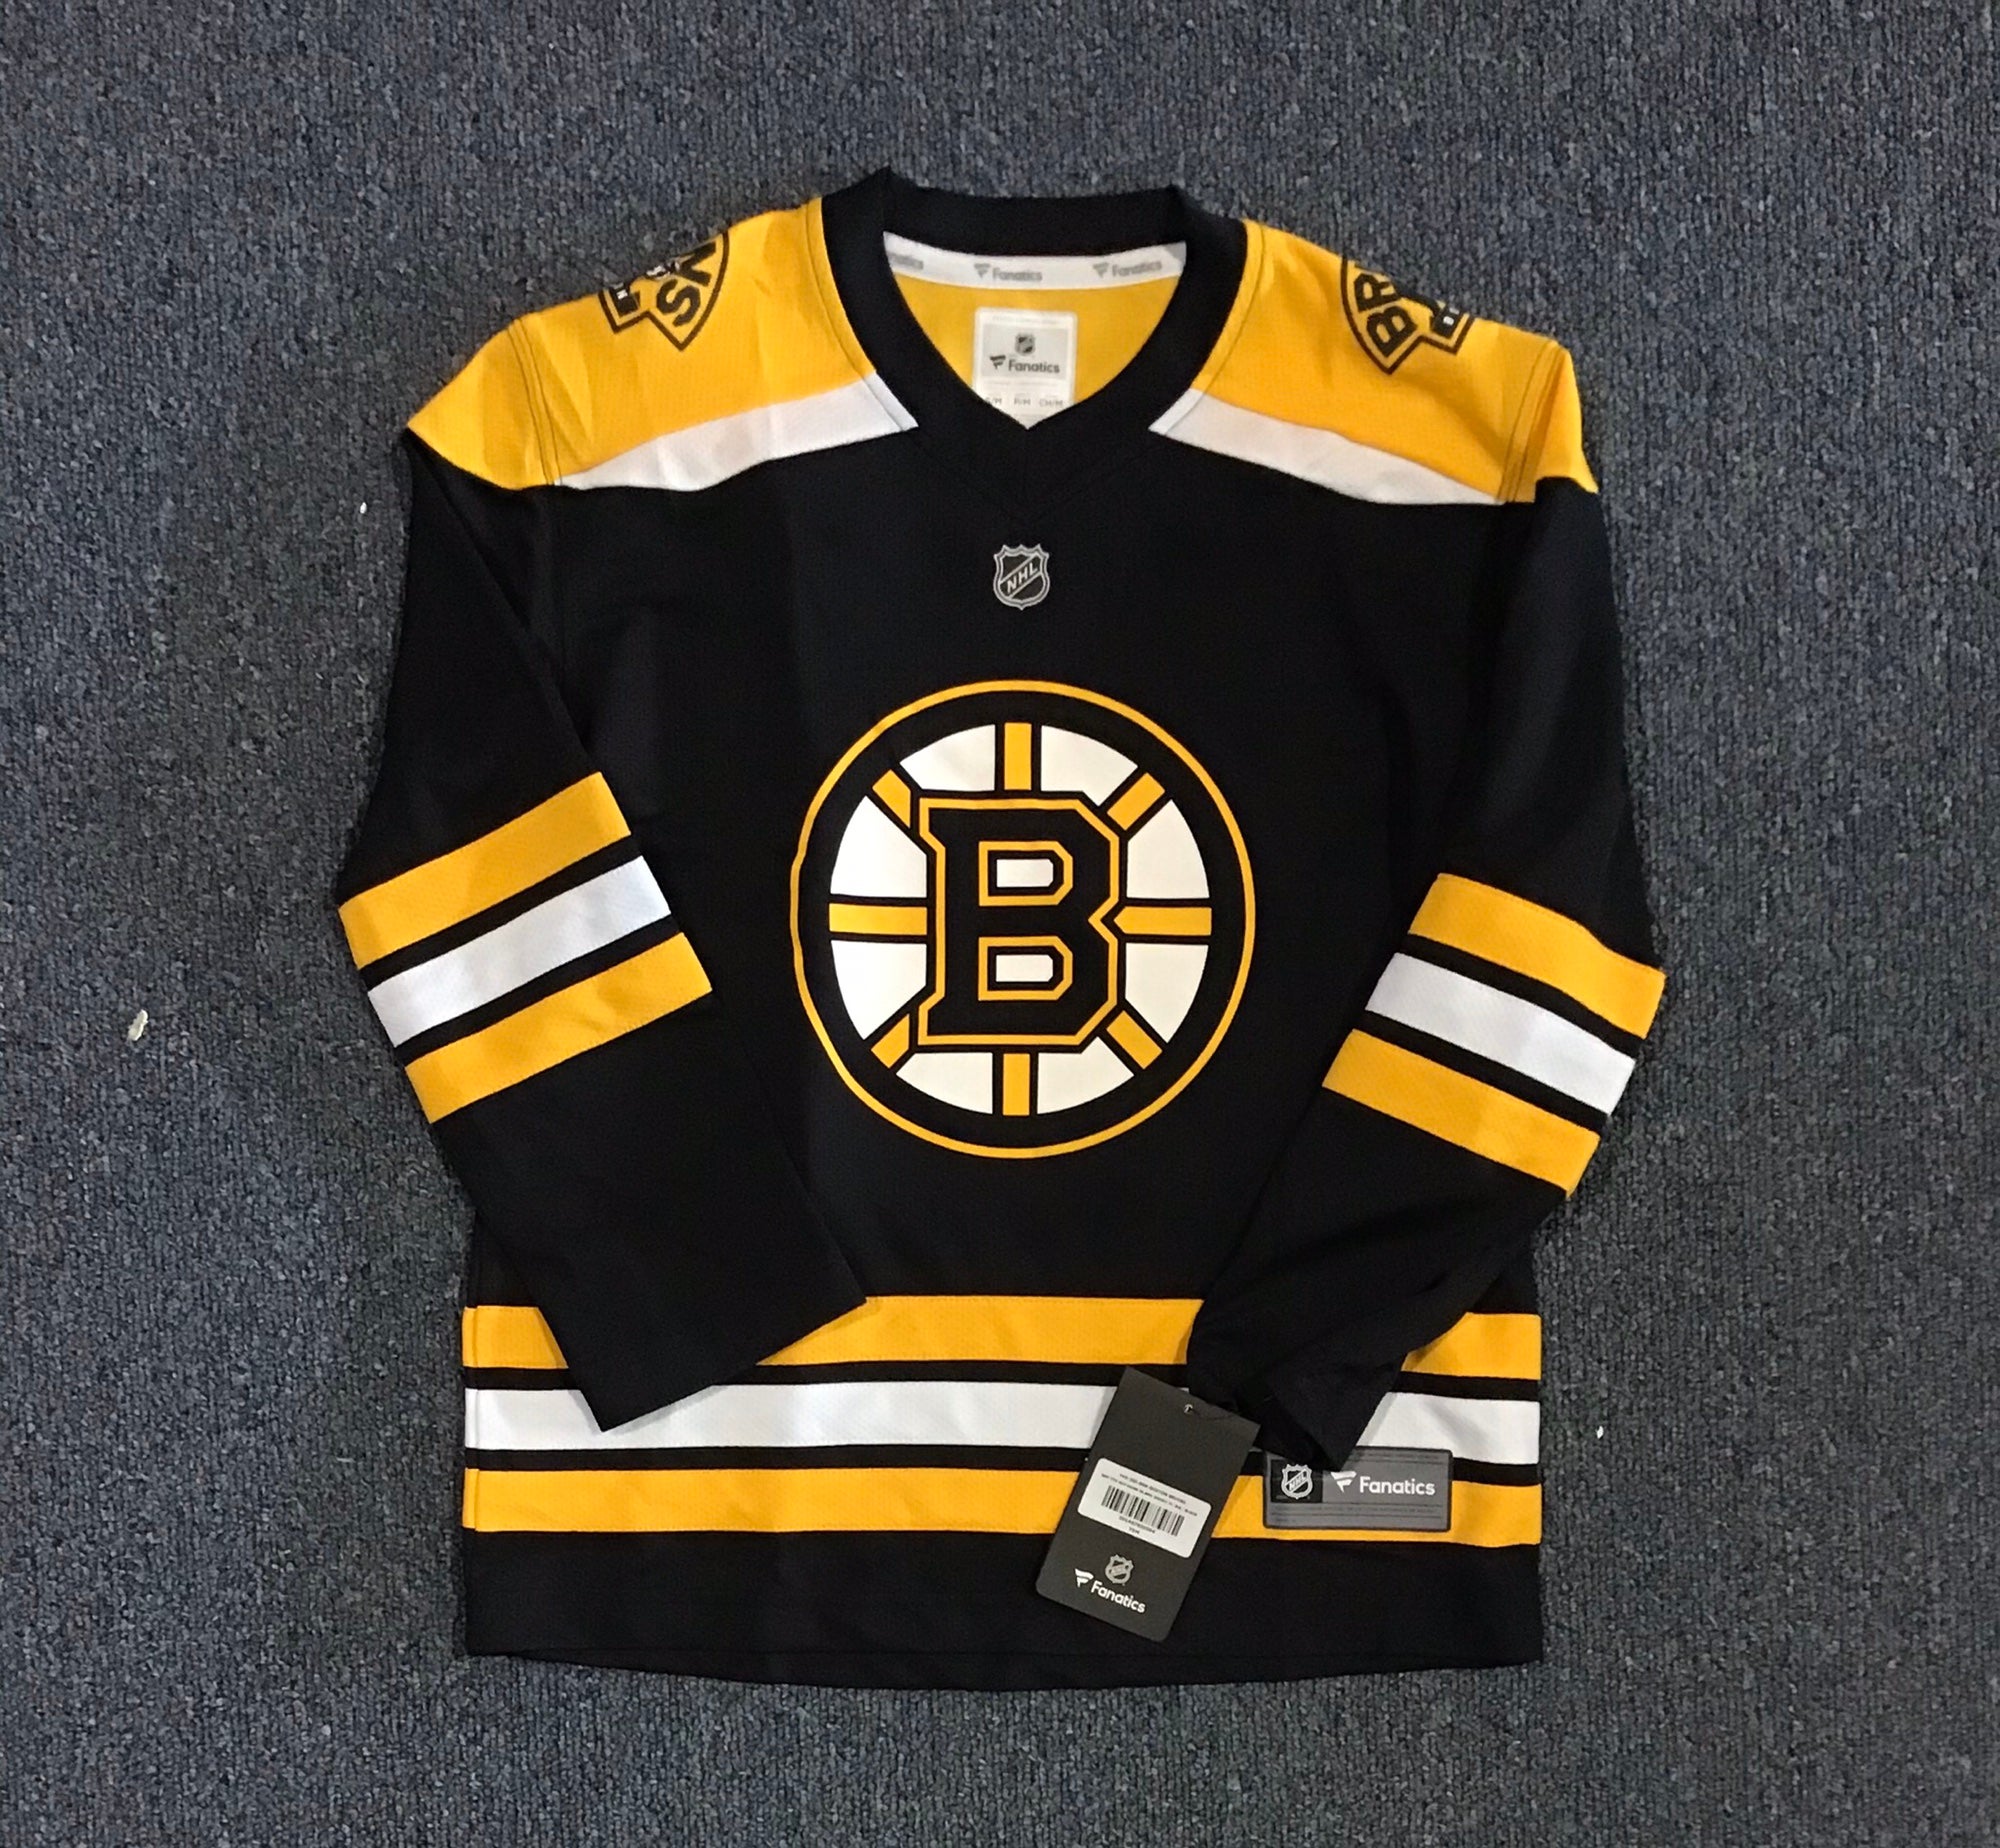 New With Tags Boston Bruins Youth Fanatics Jersey Large/XL (Blank